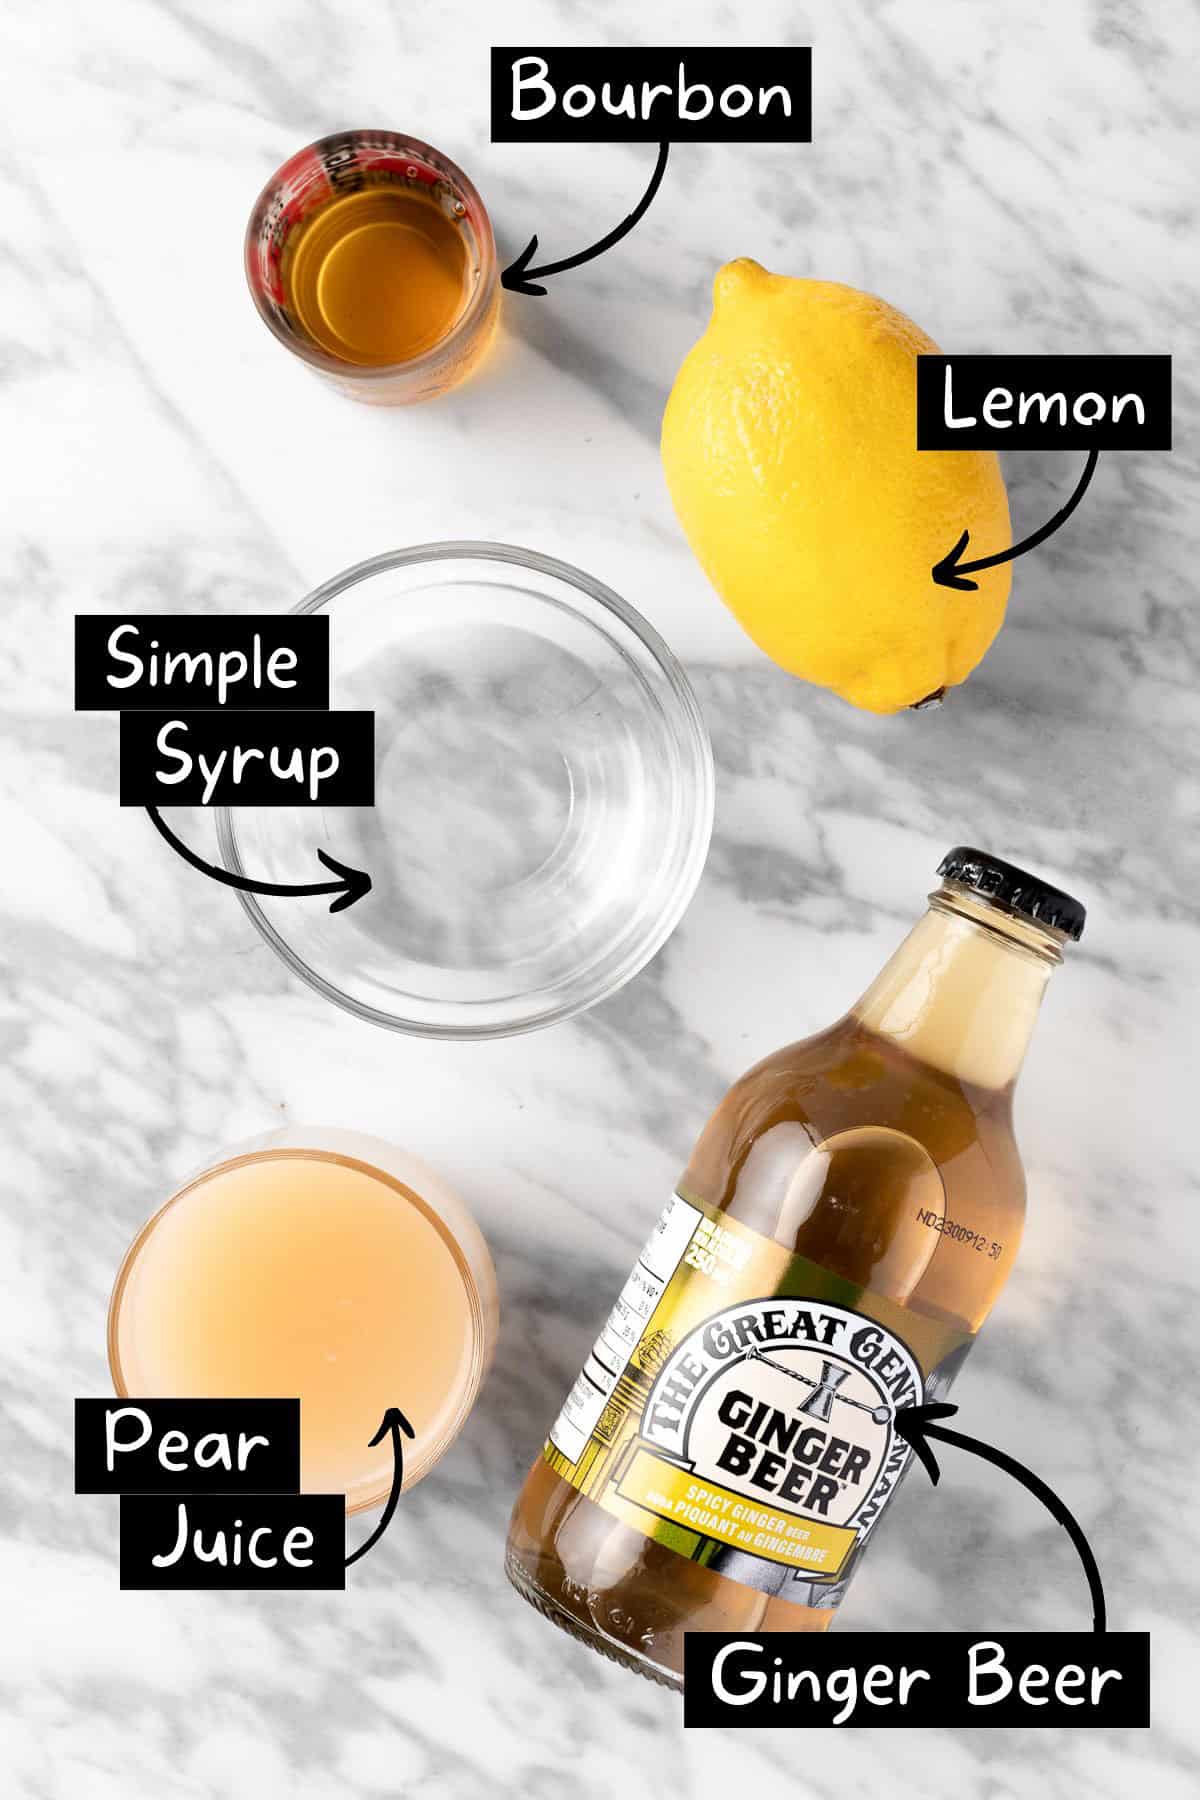 The ingredients needed to make the pear bourbon cocktail.